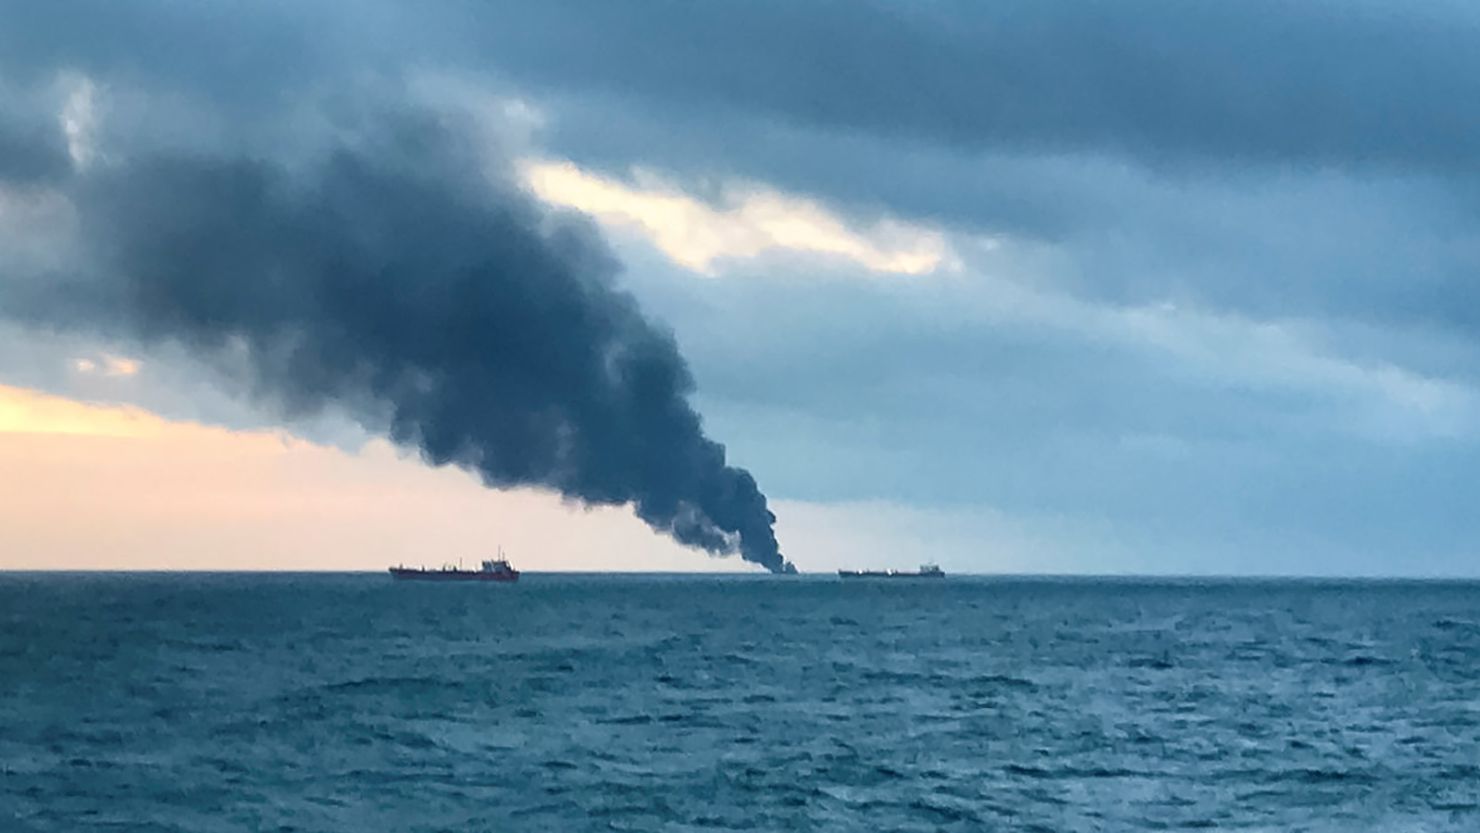 Smoke rises from ships in the Kerch Strait near Crimea on Monday.